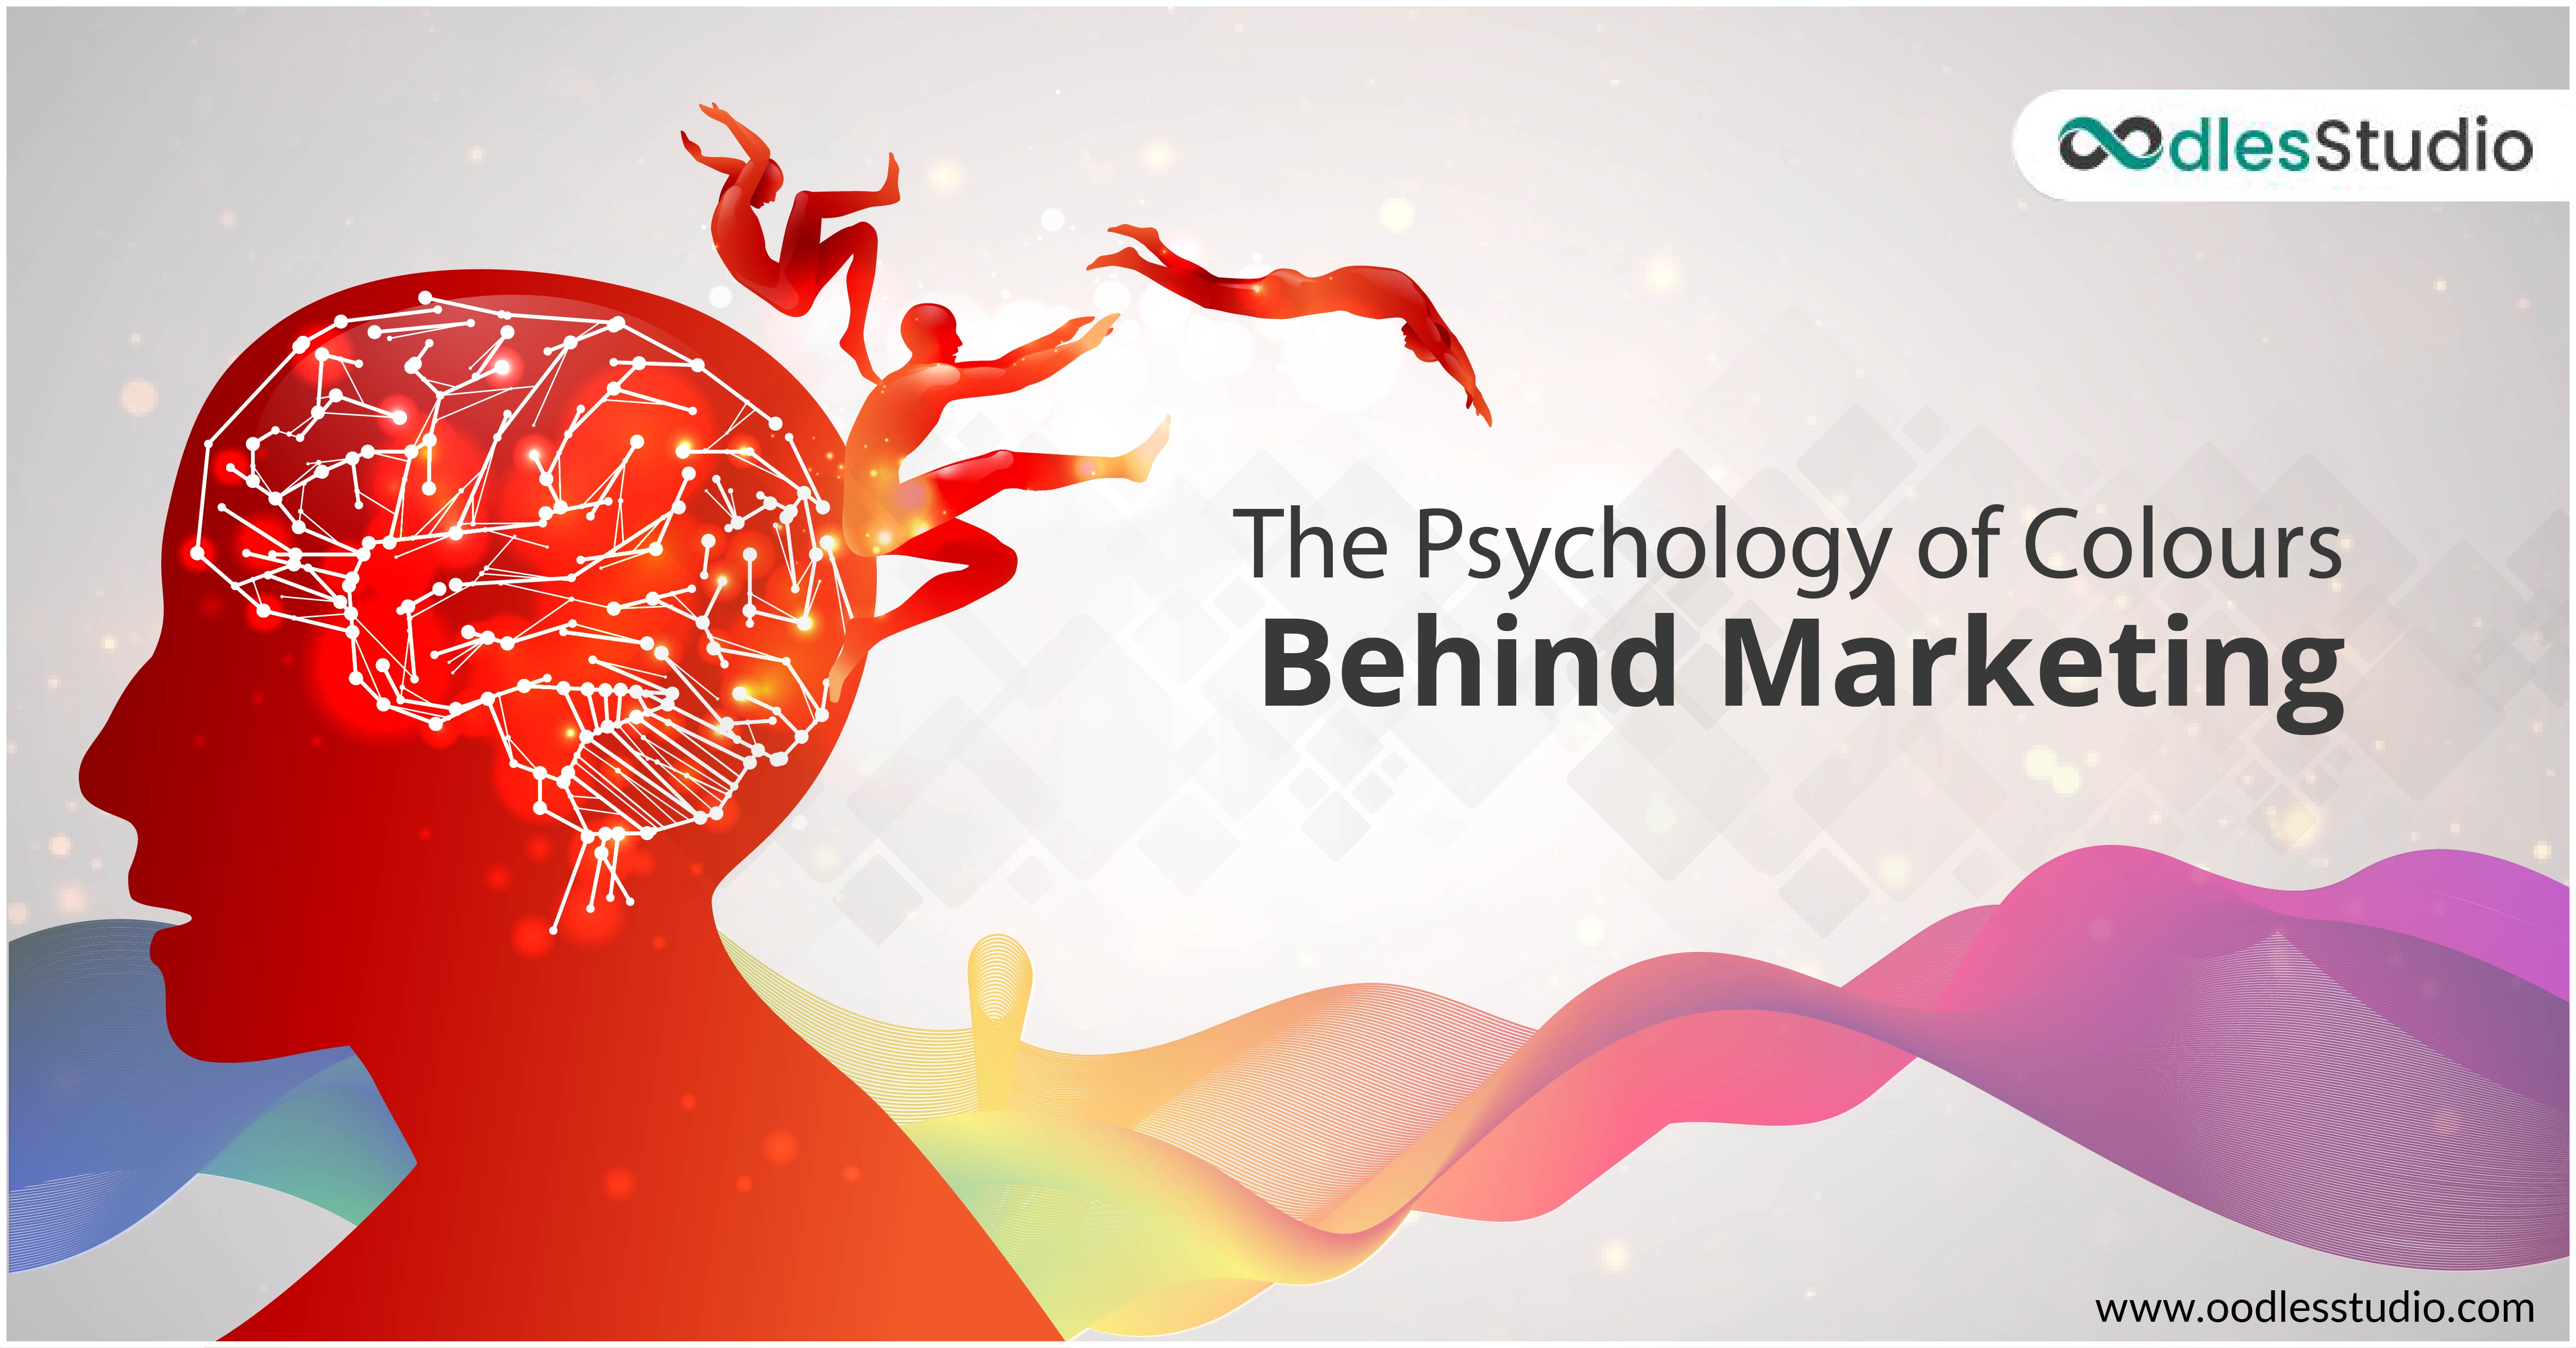 The Psychology of Colours Behind Marketing